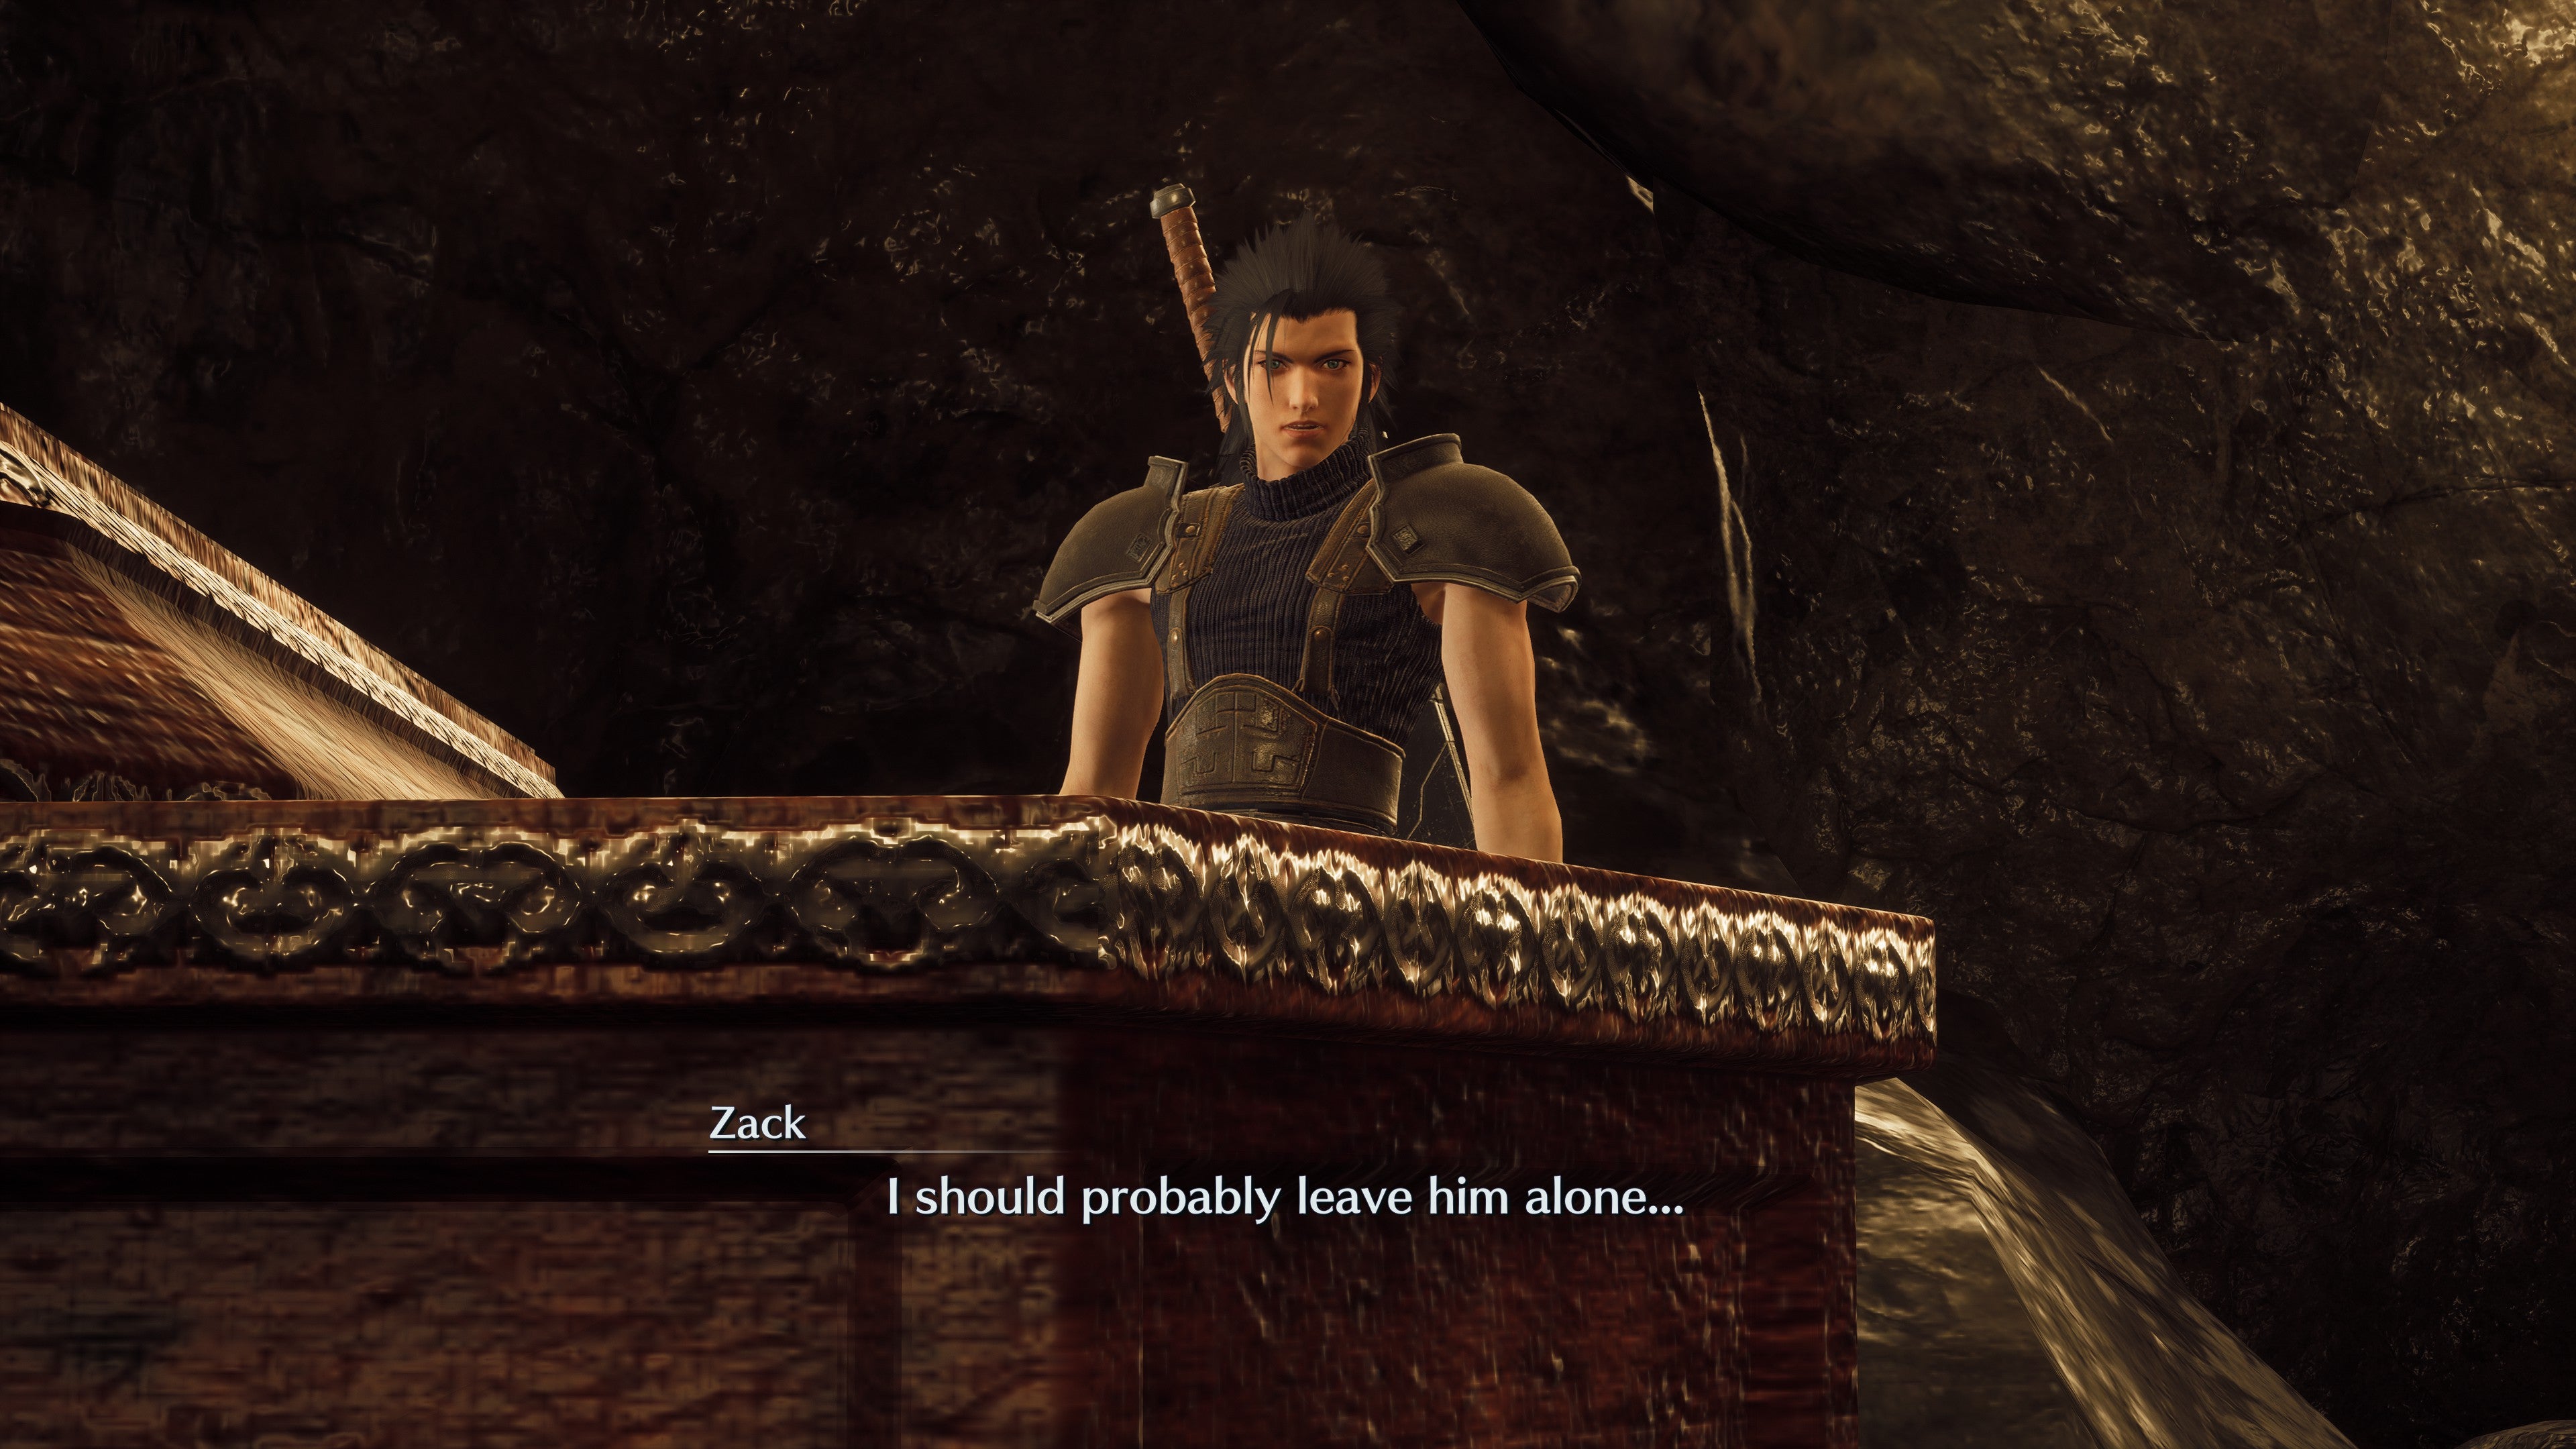 Zack looks down into a coffin in Crisis Core - Final Fantasy VII - Reunion, deciding to leave what's in there well alone.